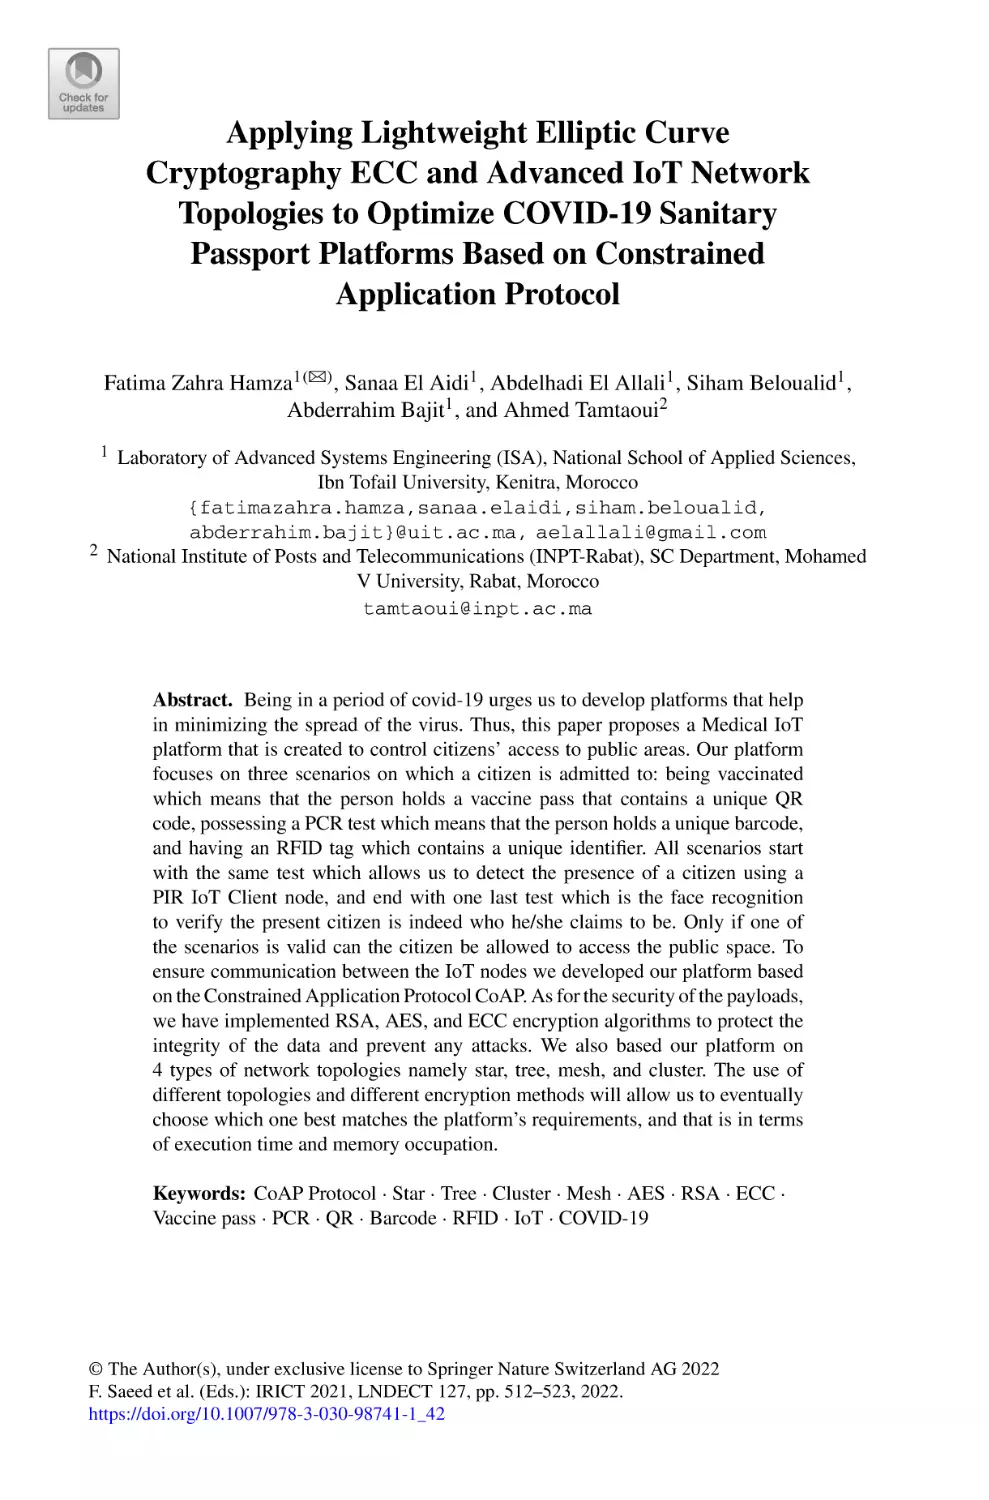 Applying Lightweight Elliptic Curve Cryptography ECC and Advanced IoT Network Topologies to Optimize COVID-19 Sanitary Passport Platforms Based on Constrained Application Protocol